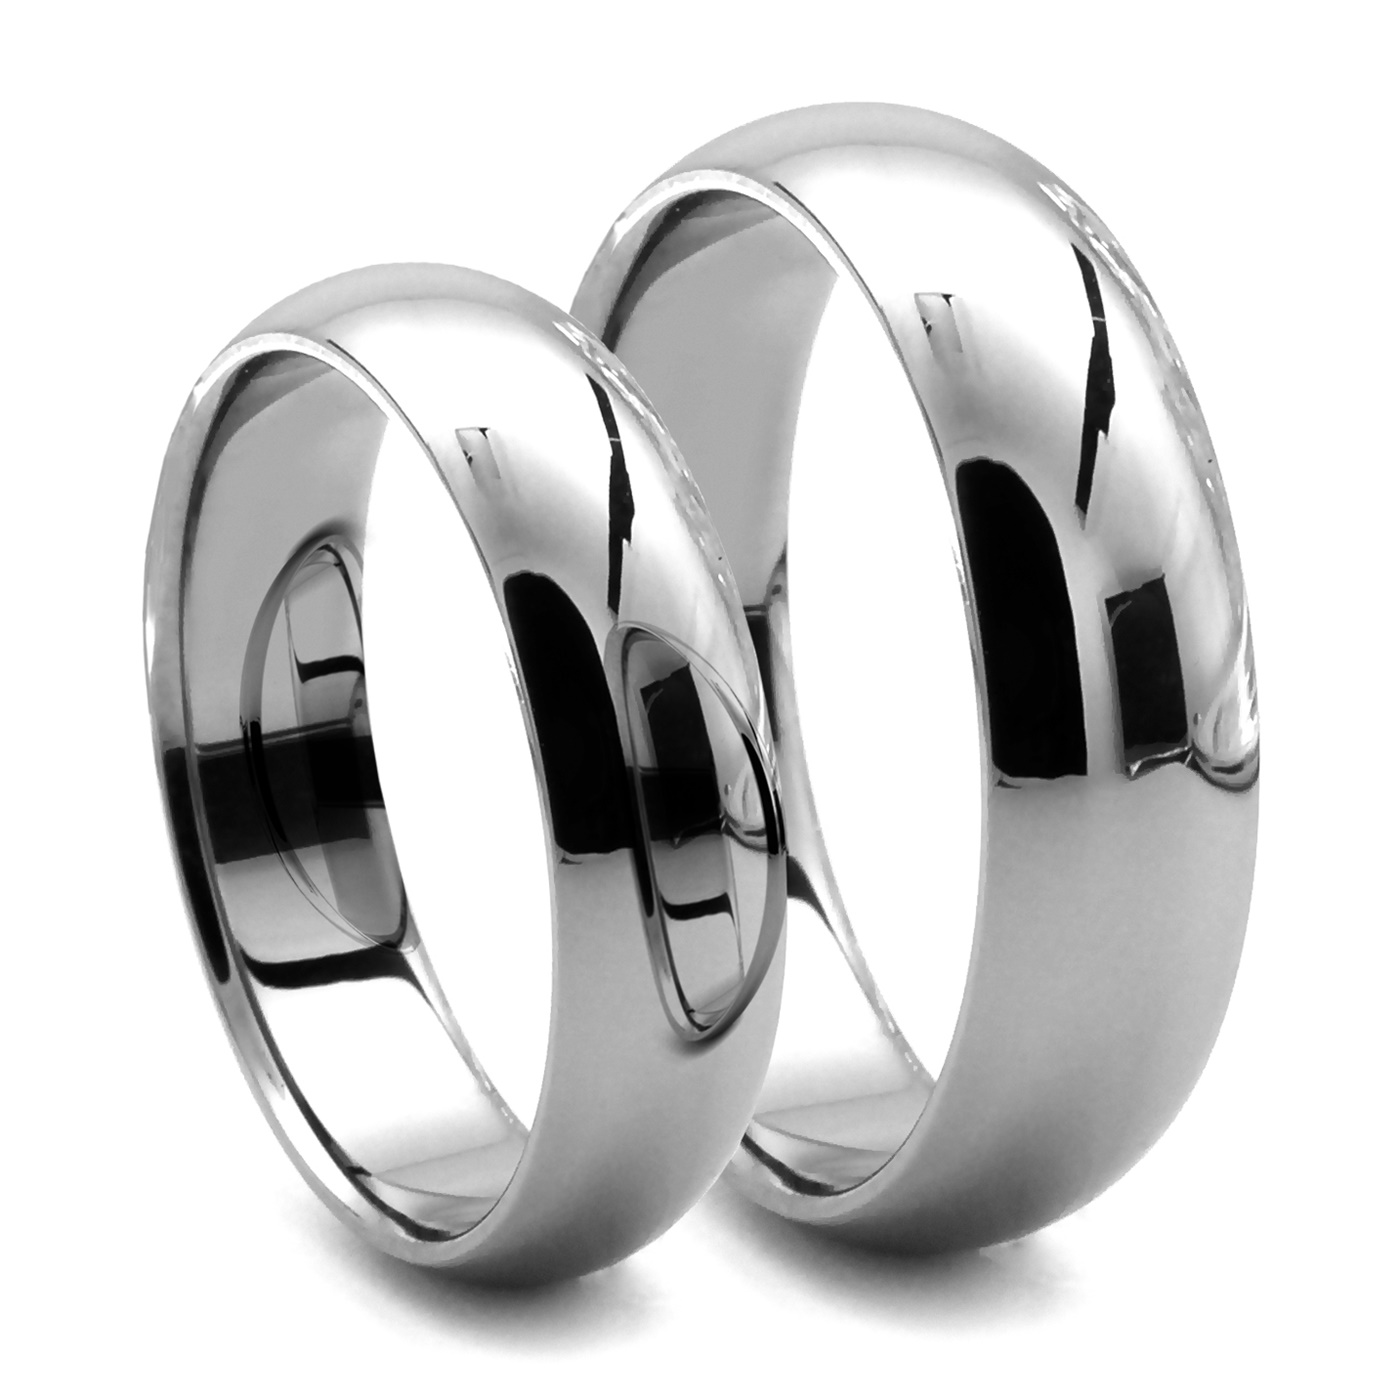 Kriskate Co His Beauty Her Beast Tungsten Rings His And Hers Wedding Bands Personalized Engraved Tungsten Ring Couples Ring Set Tcr402 No Inside Engraving Amazon Com